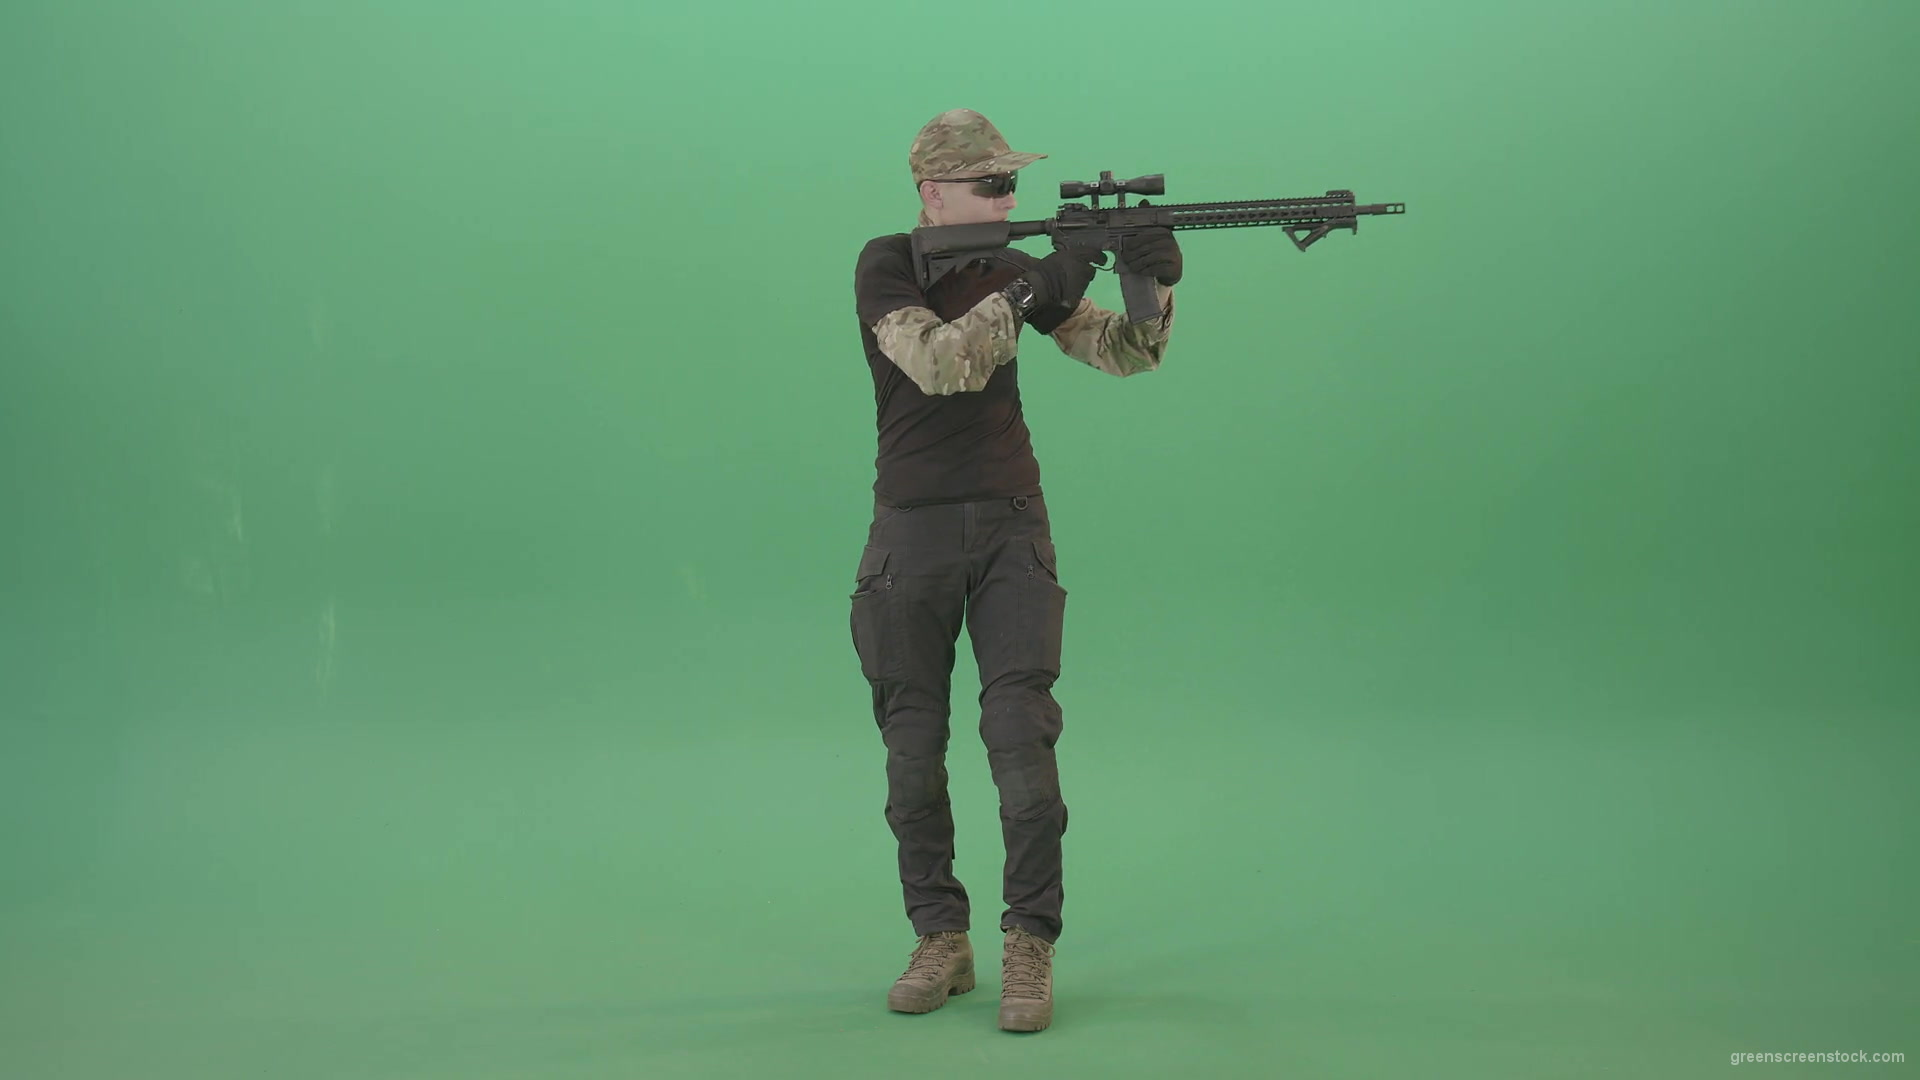 Man-in-Military-uniform-shooting-with-Army-machine-gun-isolated-on-Green-Screen-4K-Video-Footage-1920_009 Green Screen Stock